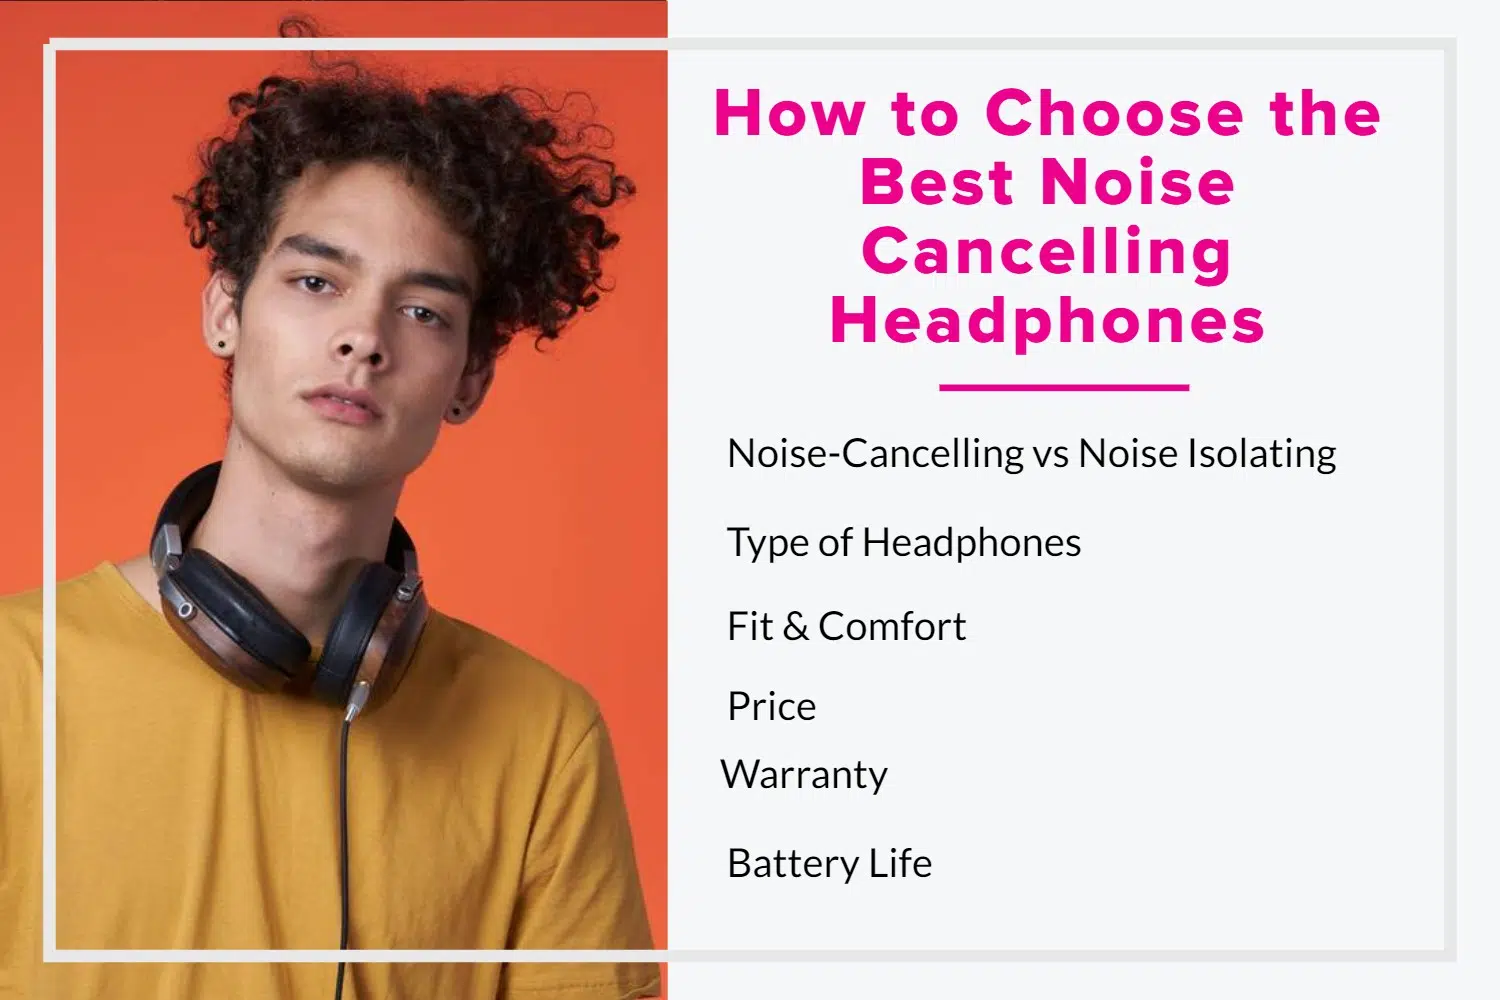 How to Choose the best noise cancelling headphones